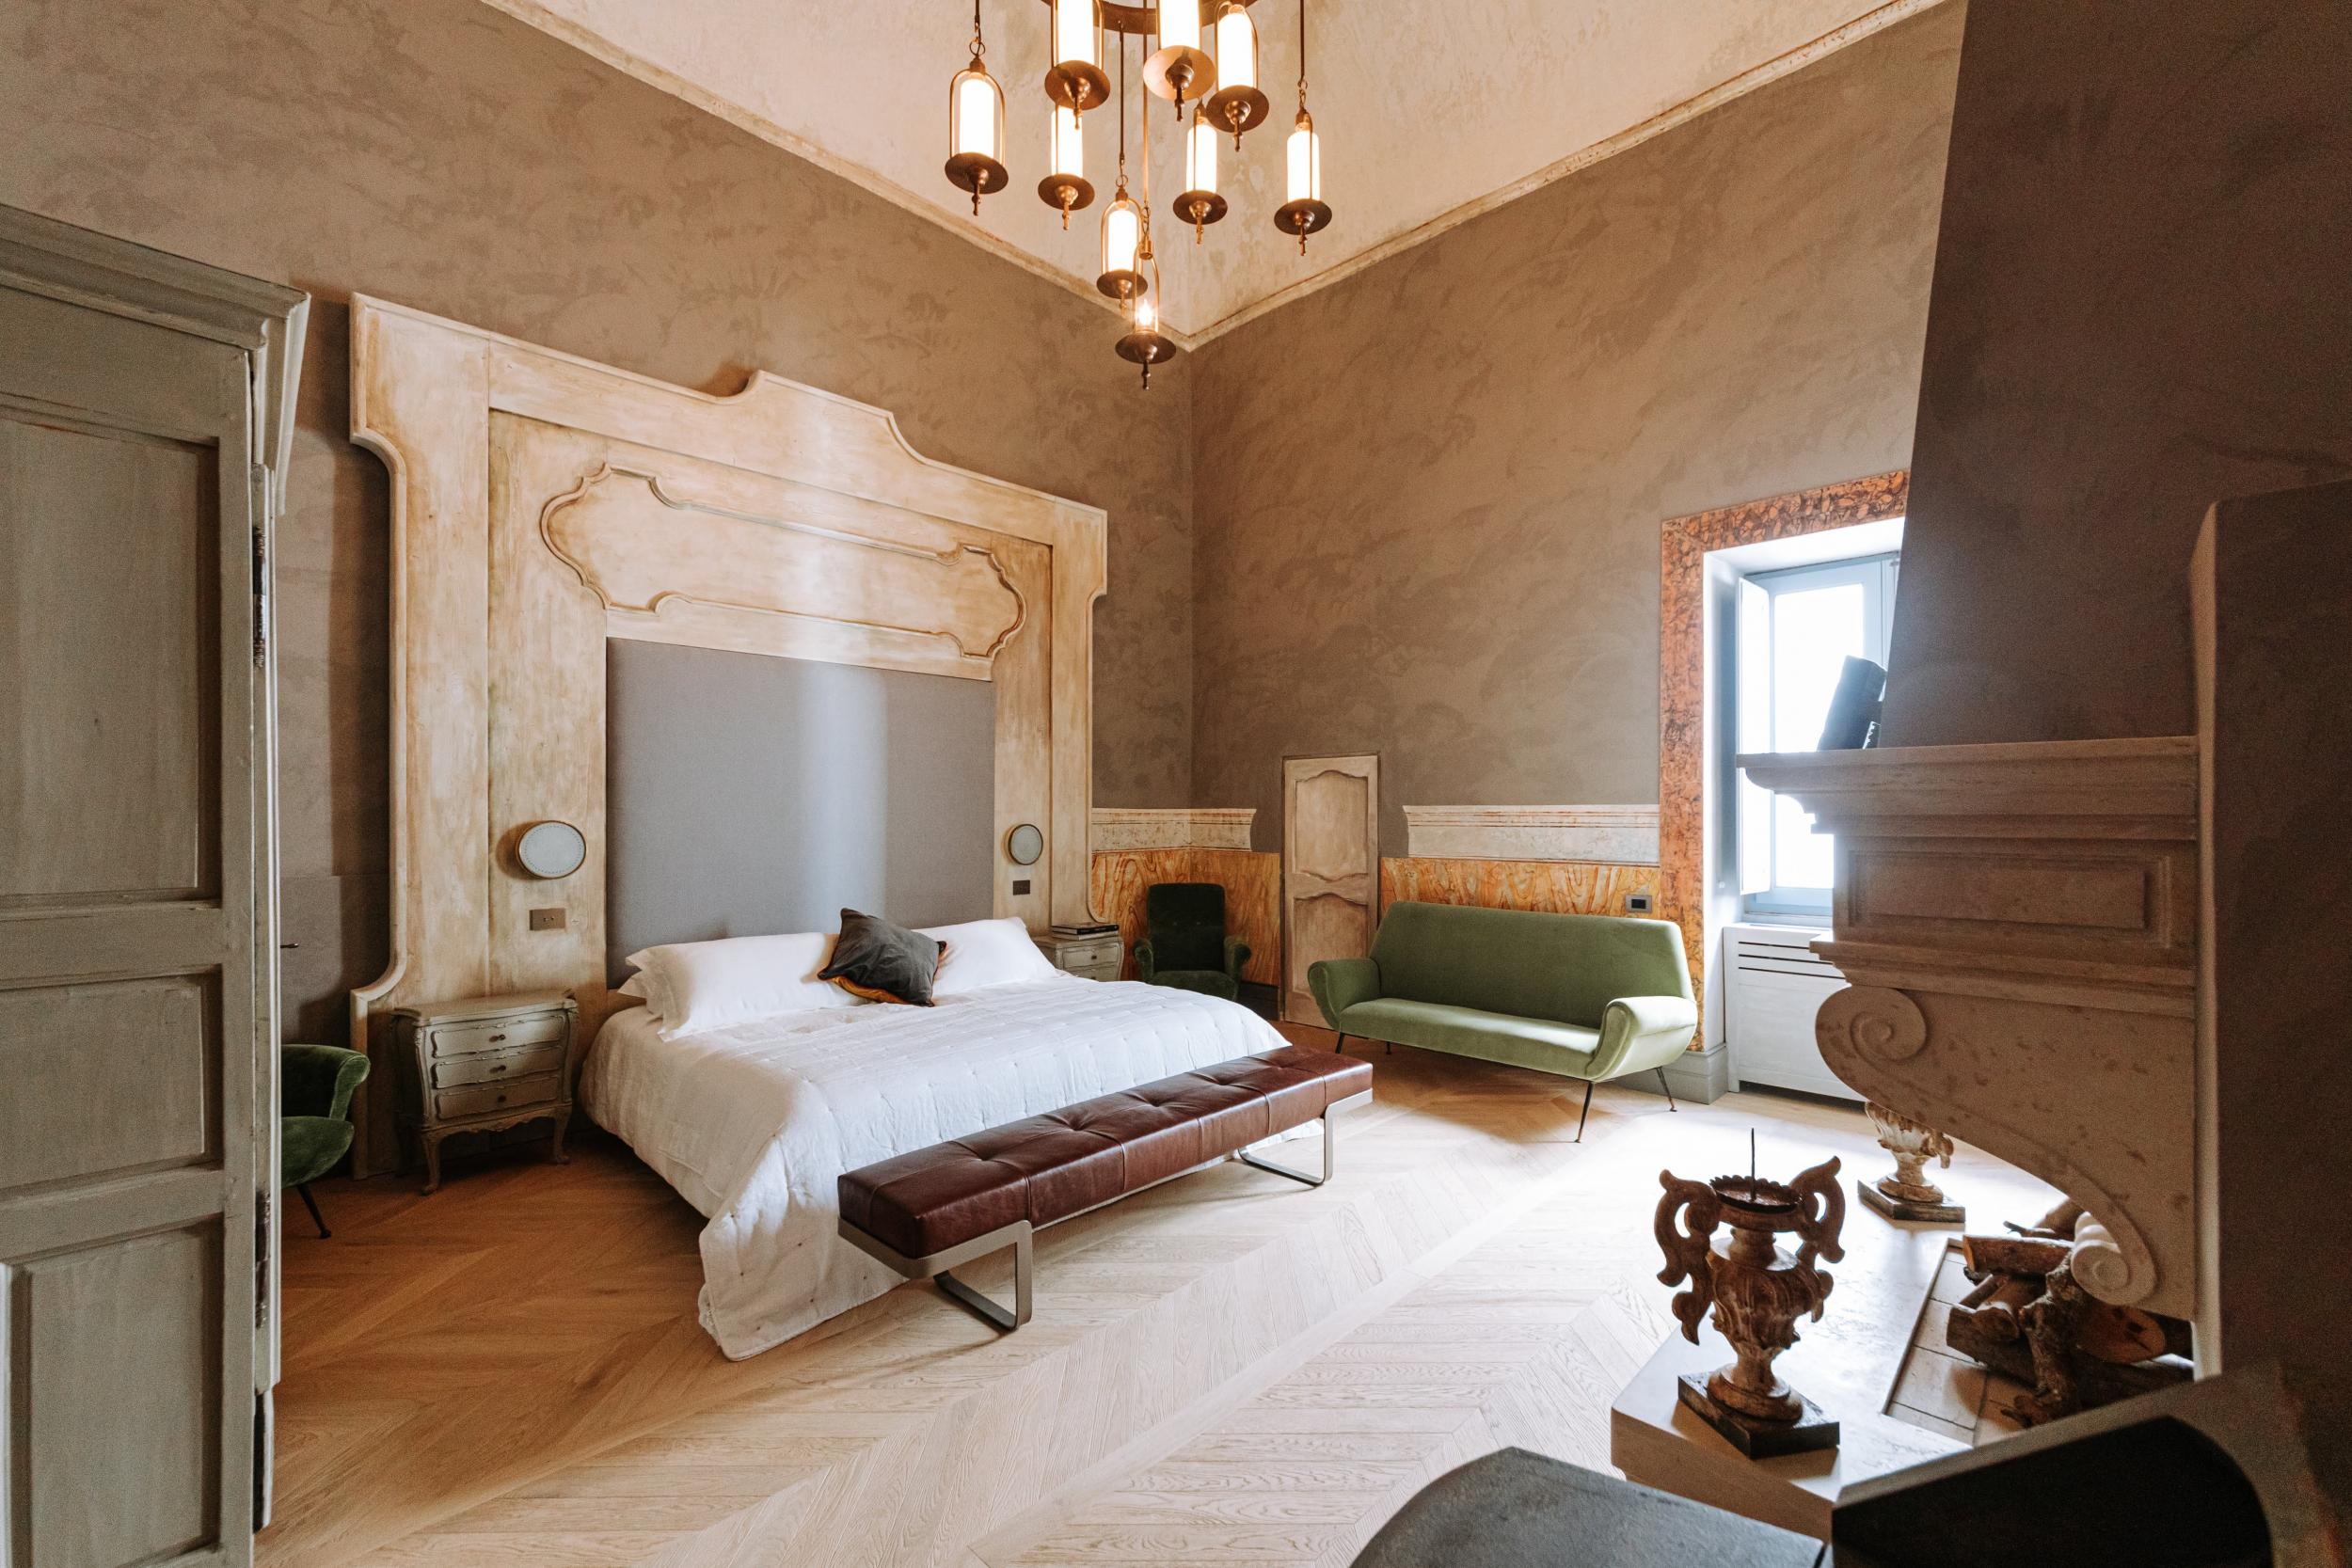 Traditional techniques have been employed to restore period frescoes and fireplaces (Paragon 700 Boutique Hotel &amp; Spa)